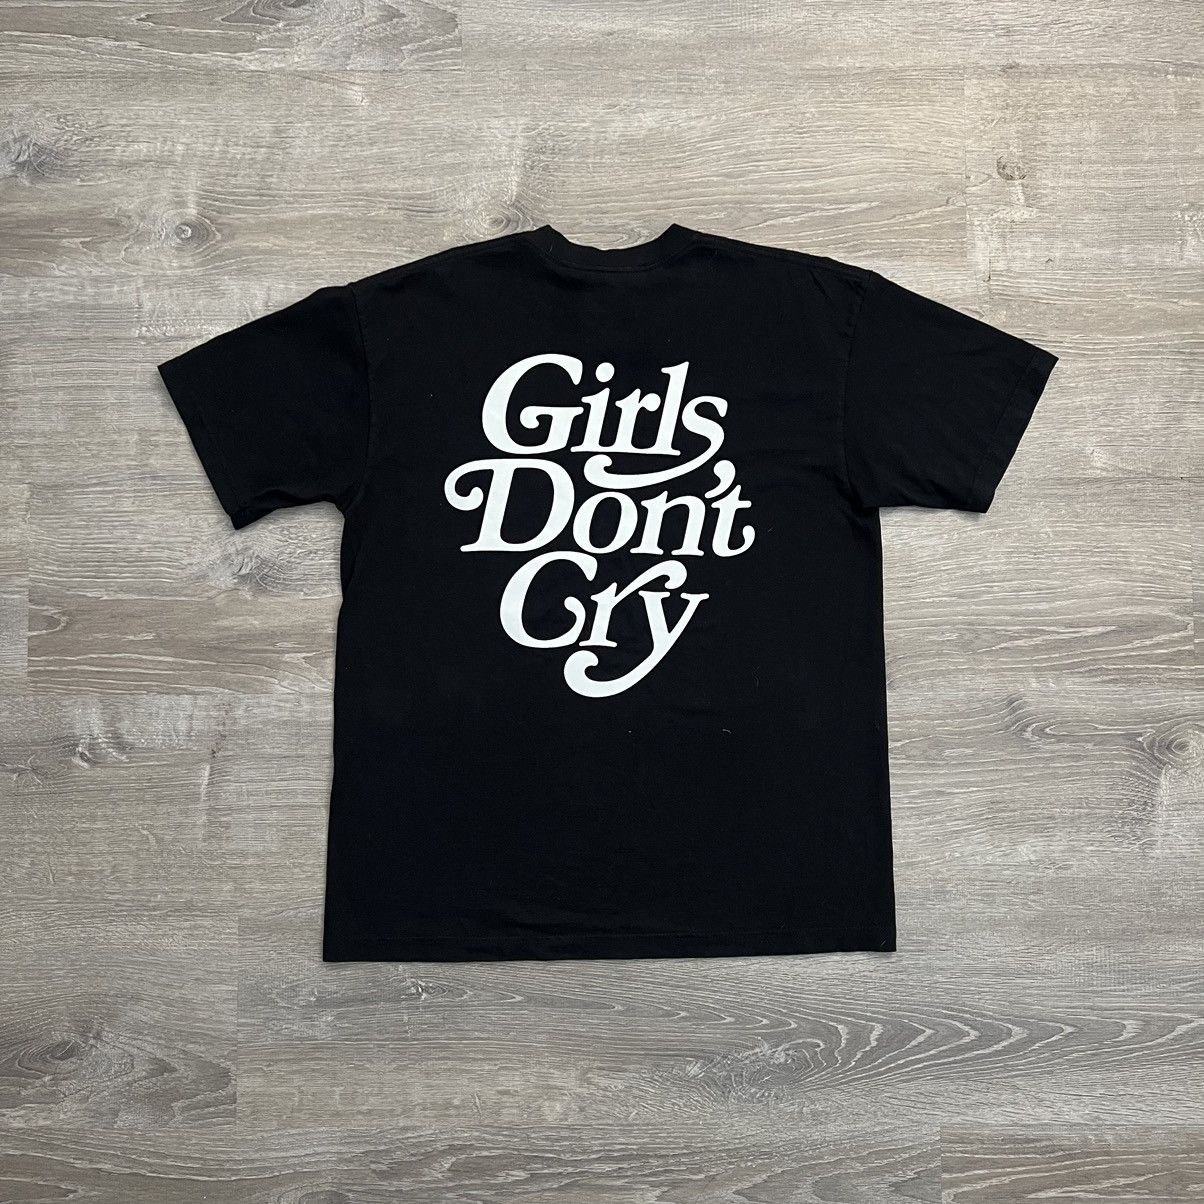 Girls Dont Cry Girls Don't Cry Black Logo Tee Wasted Youth Verdy | Grailed